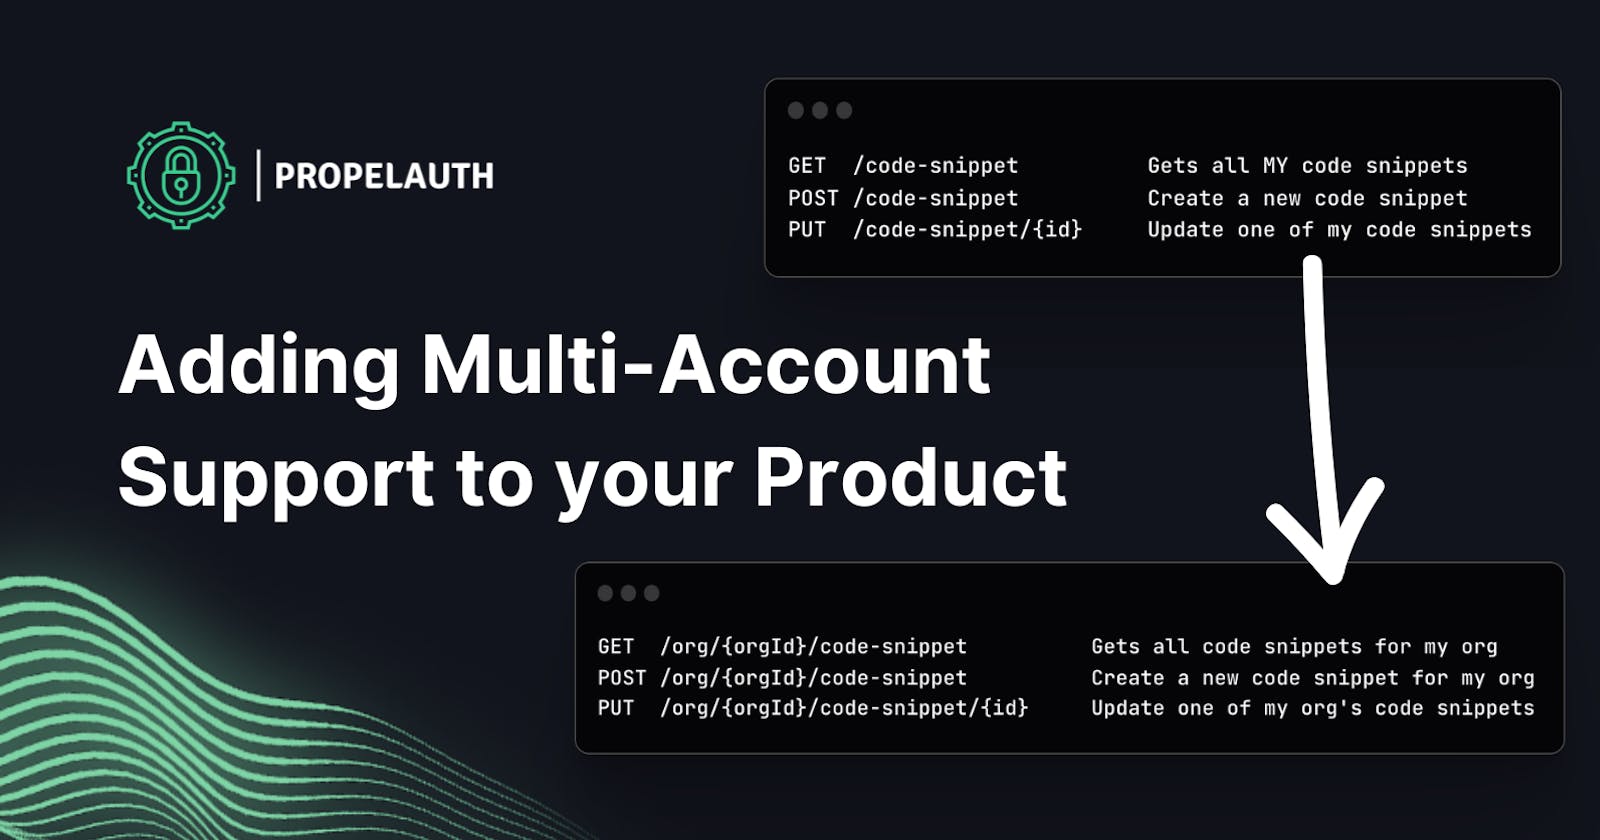 Adding Multi-Account Support to Your Product With PropelAuth